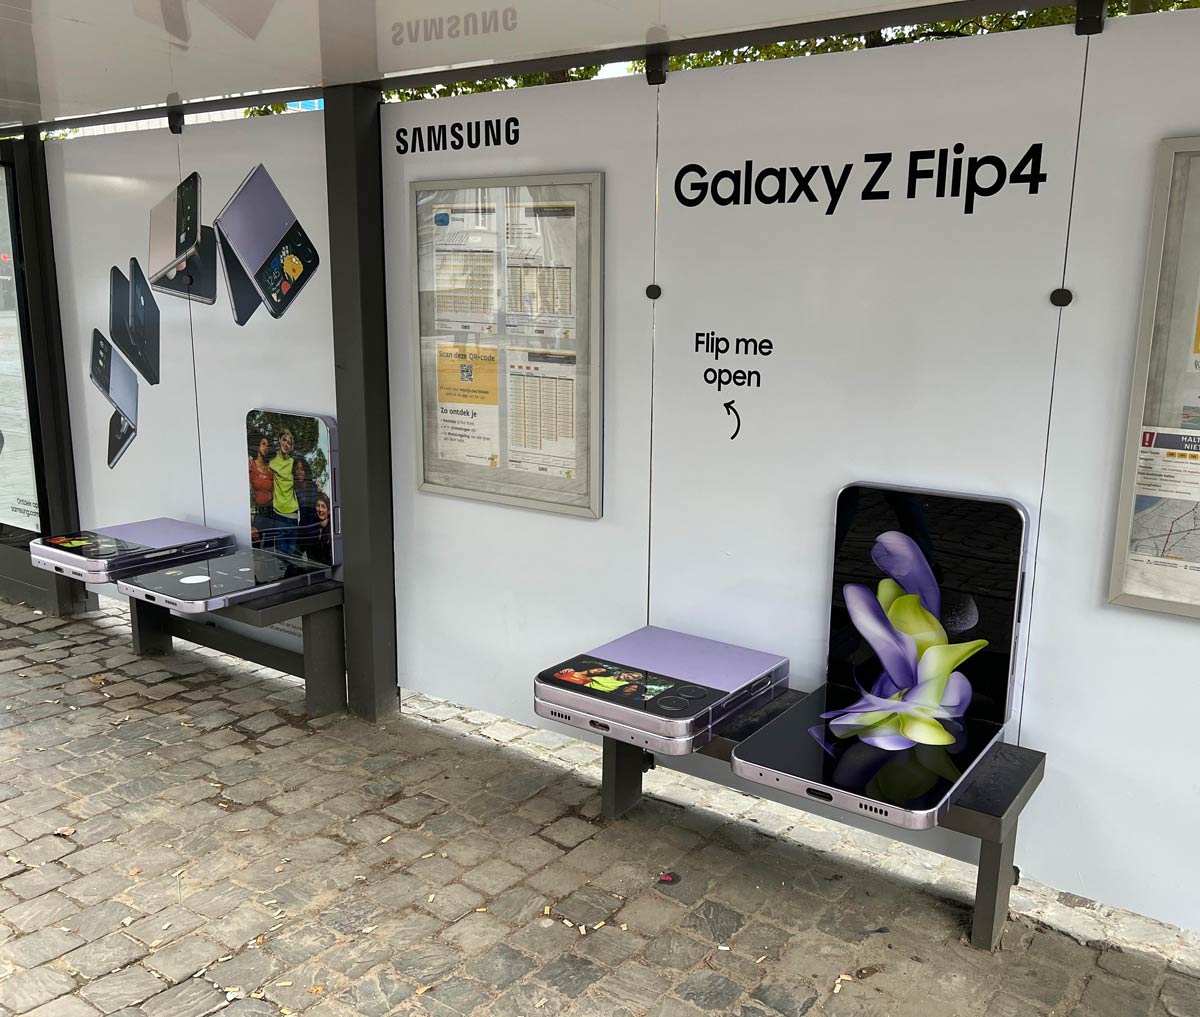 Samsung’s advertisement at a bus stop in Belgium